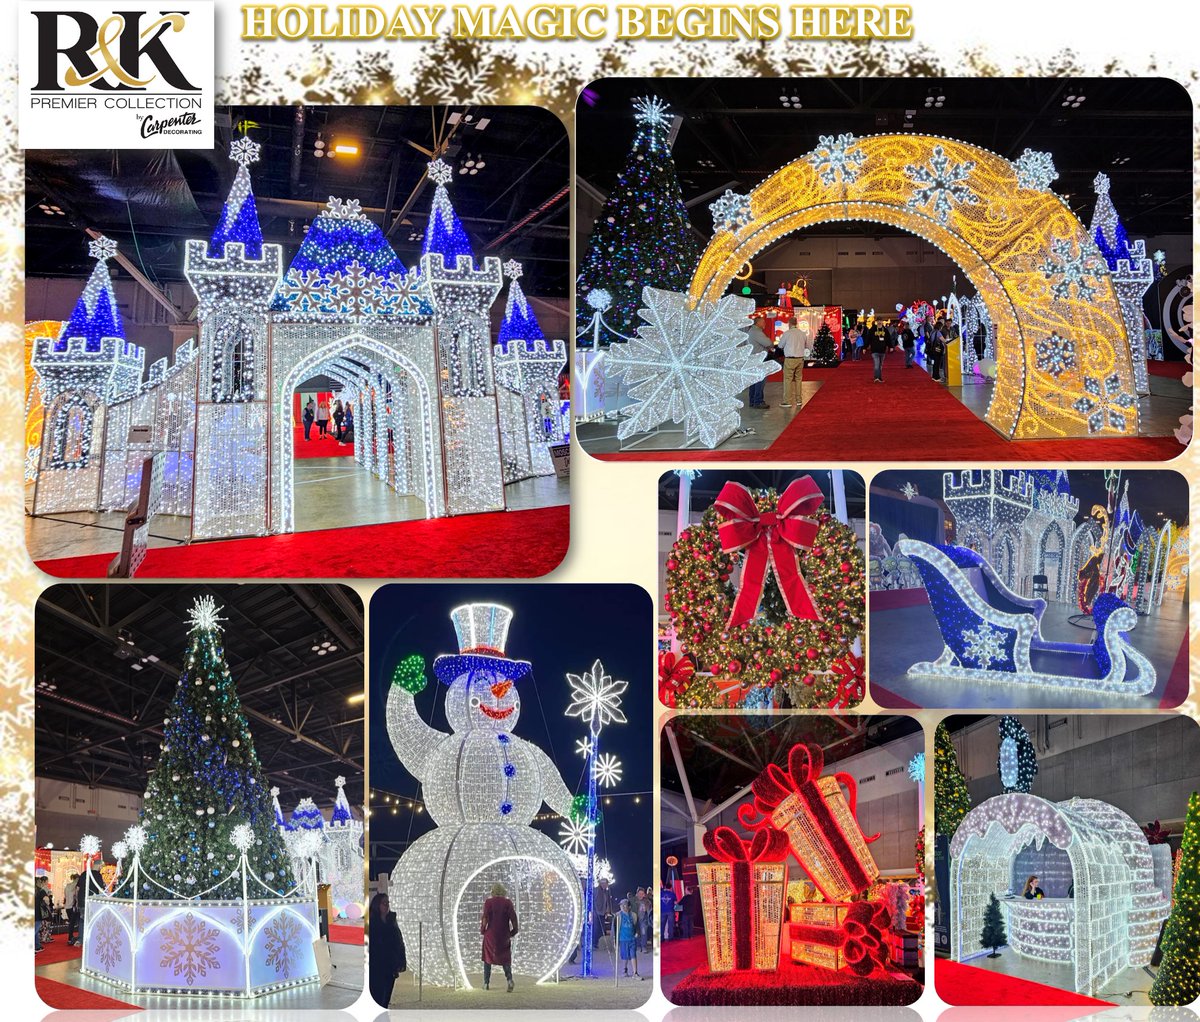 Rediscover the Holiday Magic with our Spectacular R&K Premier Collection 😍🎄

carpenterdecorating.com/decor/premiere…

#Commercial #christmasdecor #premier #collection #carpenterdecorating #Wednesdayvibe